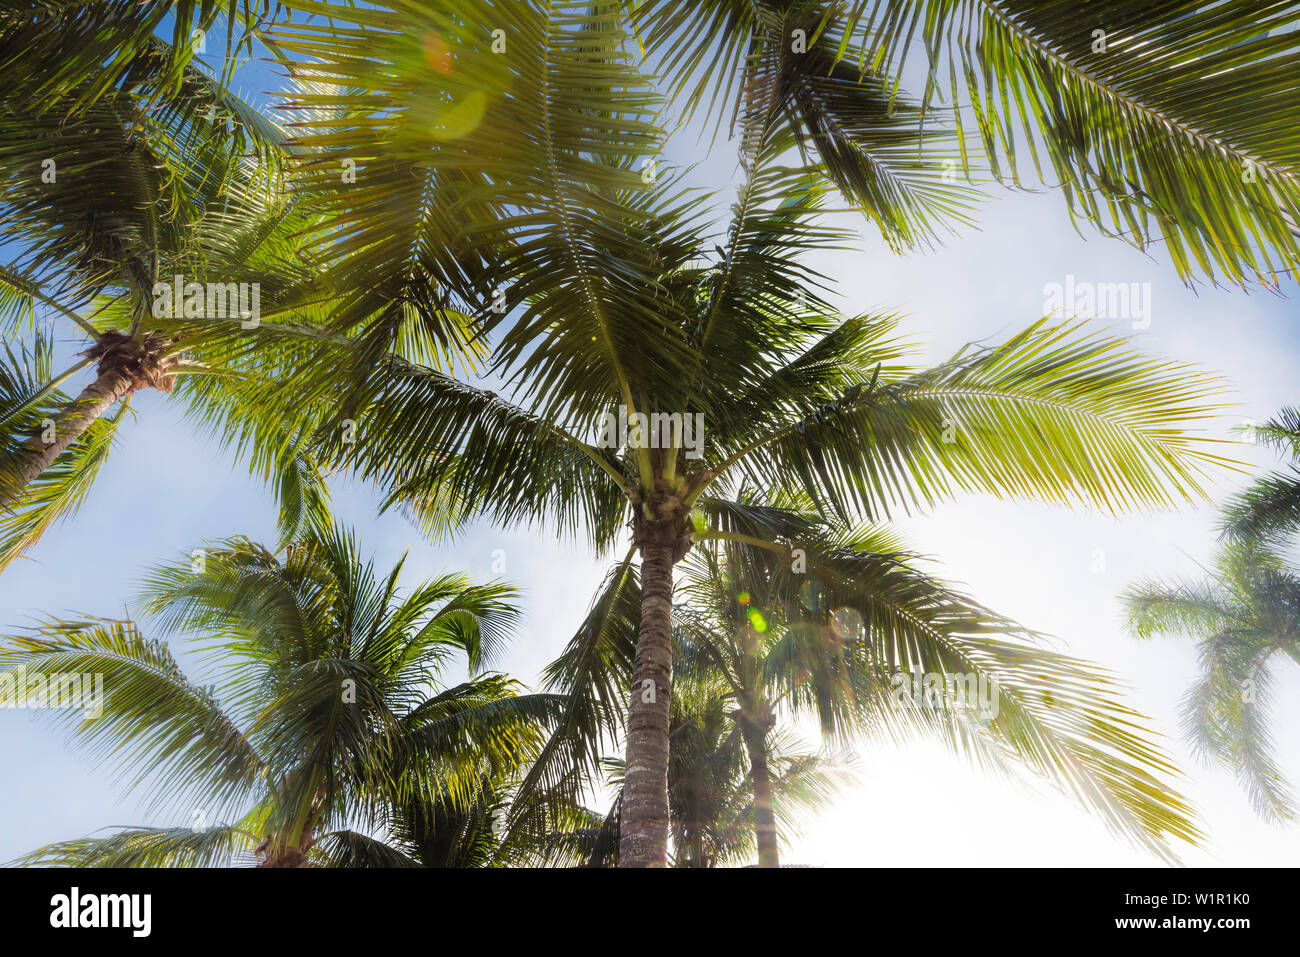 Typical palm trees in the sunshine state, Fort Myers Beach, Florida, USA Stock Photo